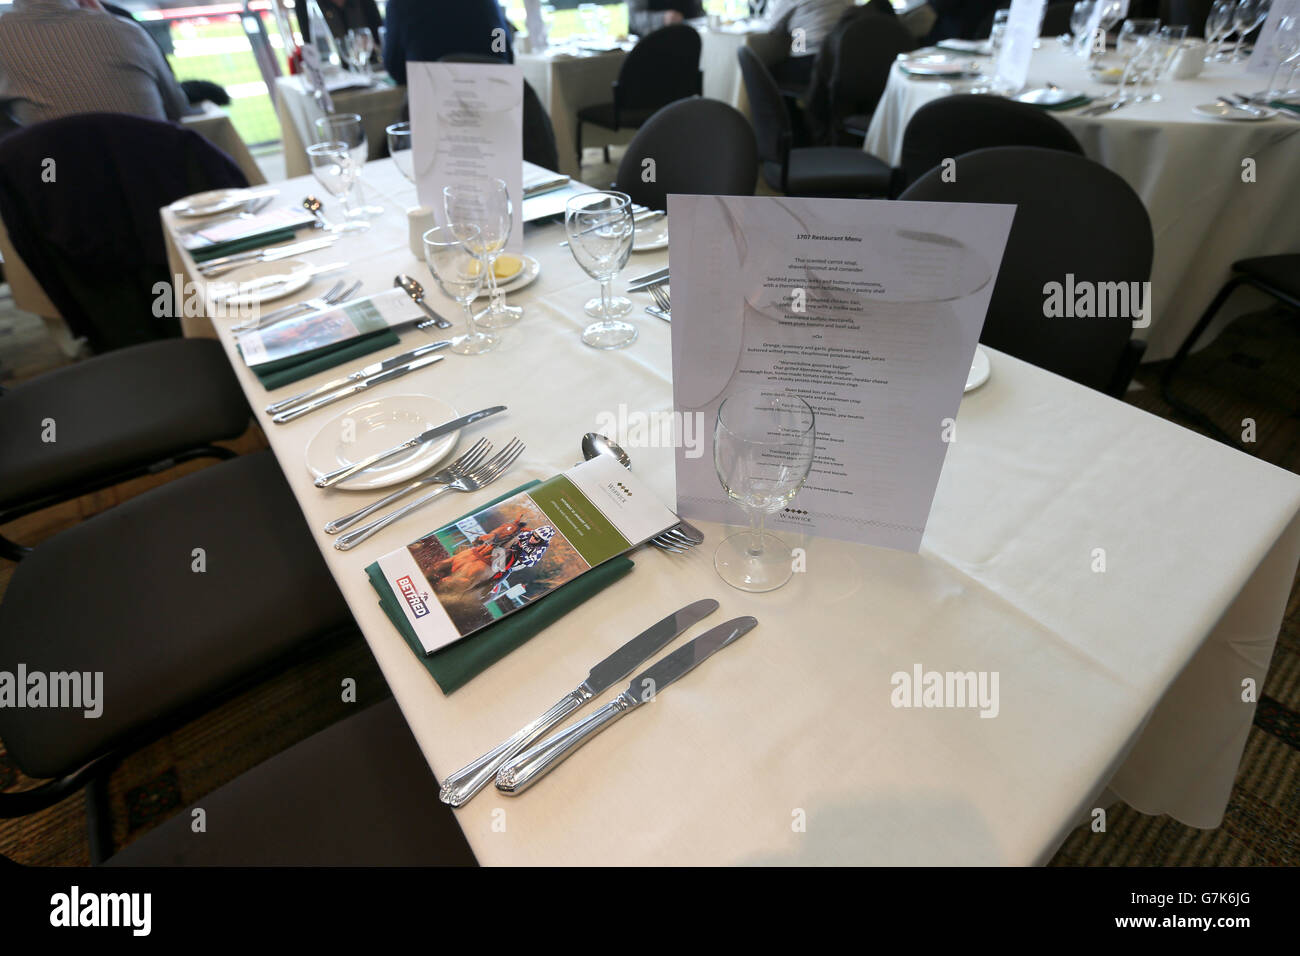 Horse Racing - Betfred Classic Chase Day - Warwick Racecourse. Hospitality laid out ready for guests on Betfred Classic Chase Day Stock Photo